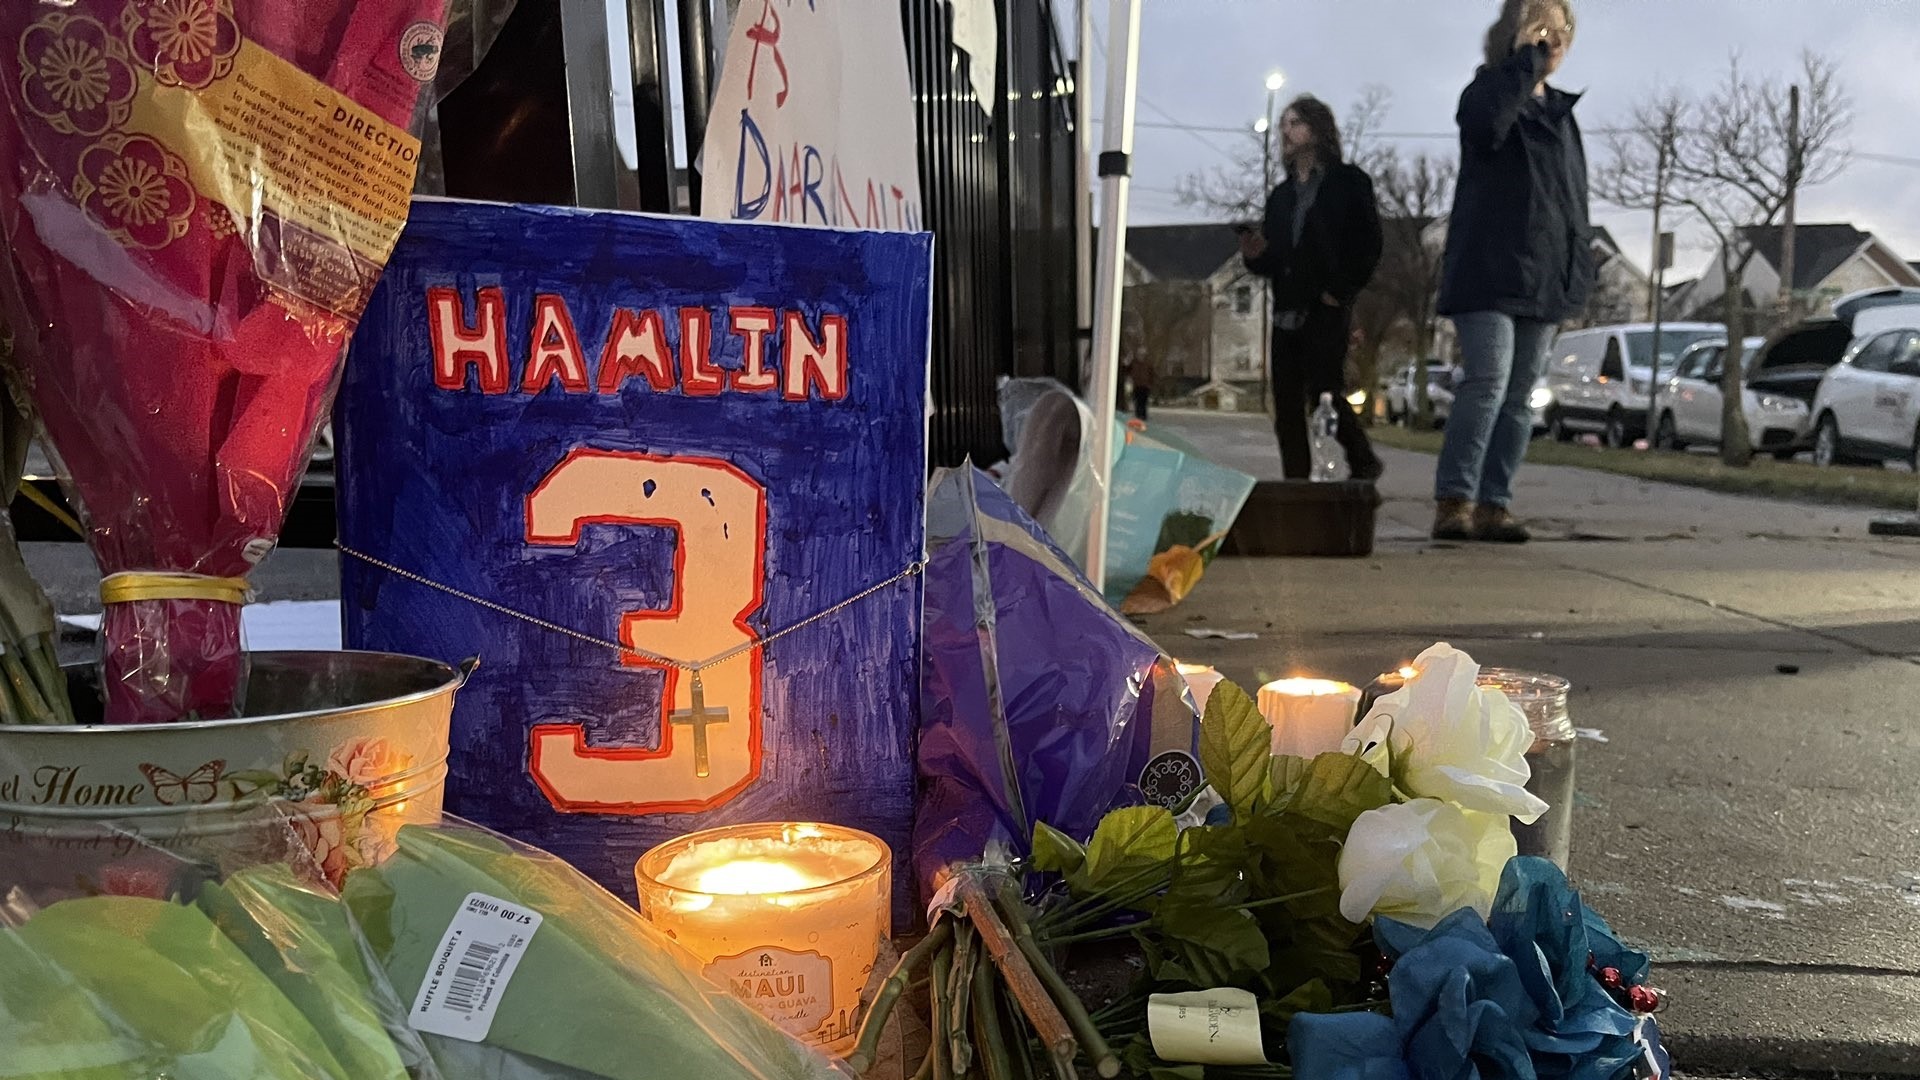 Fans, former players show support for Damar Hamlin after collapse